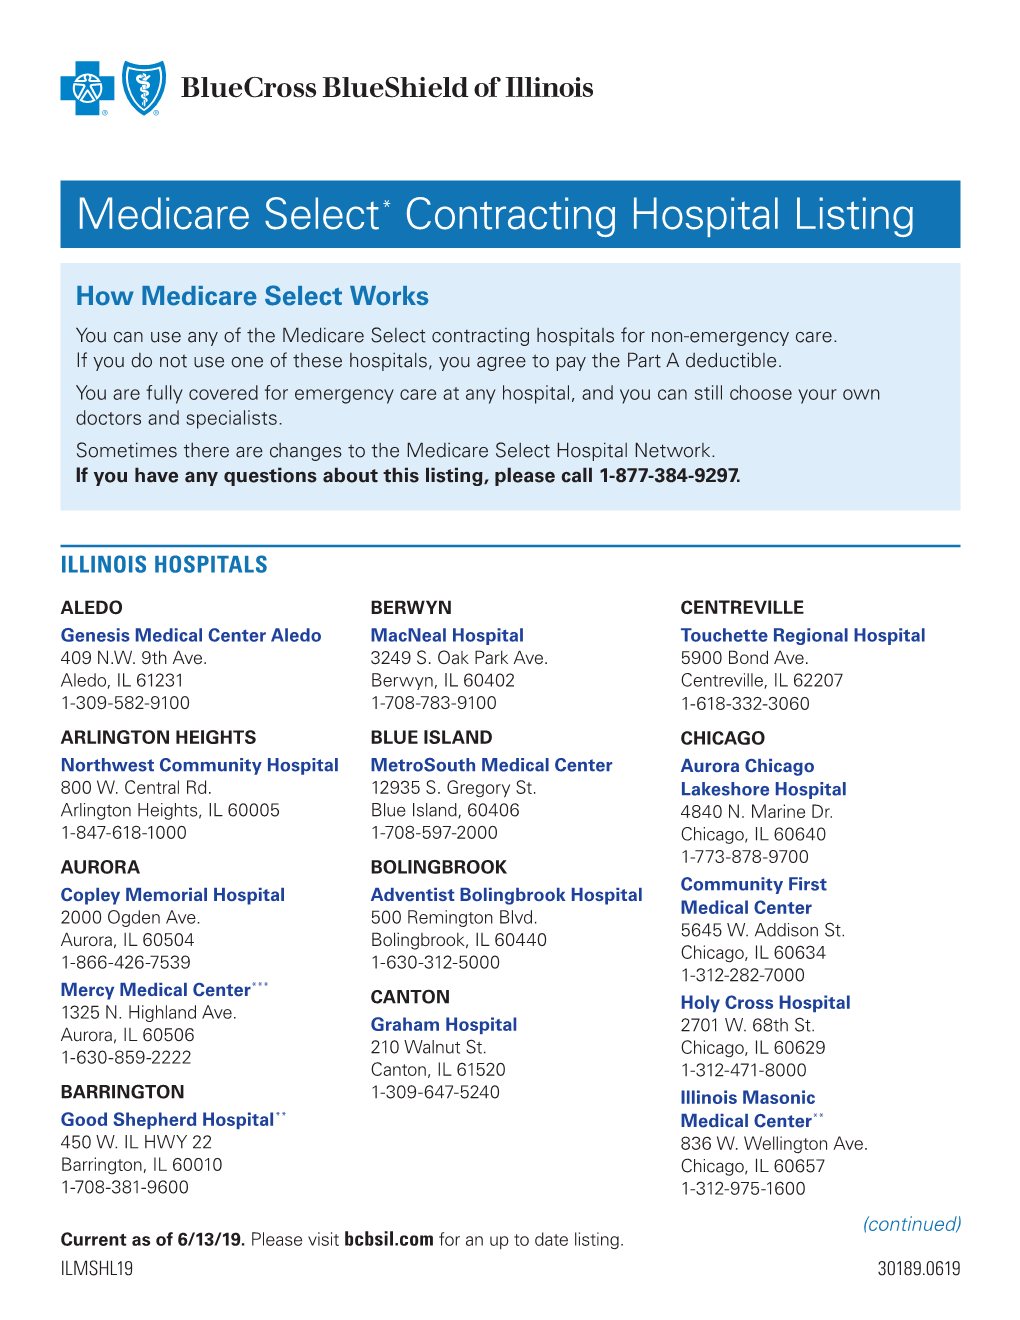 Medicare Select Contracting Hospital Listing